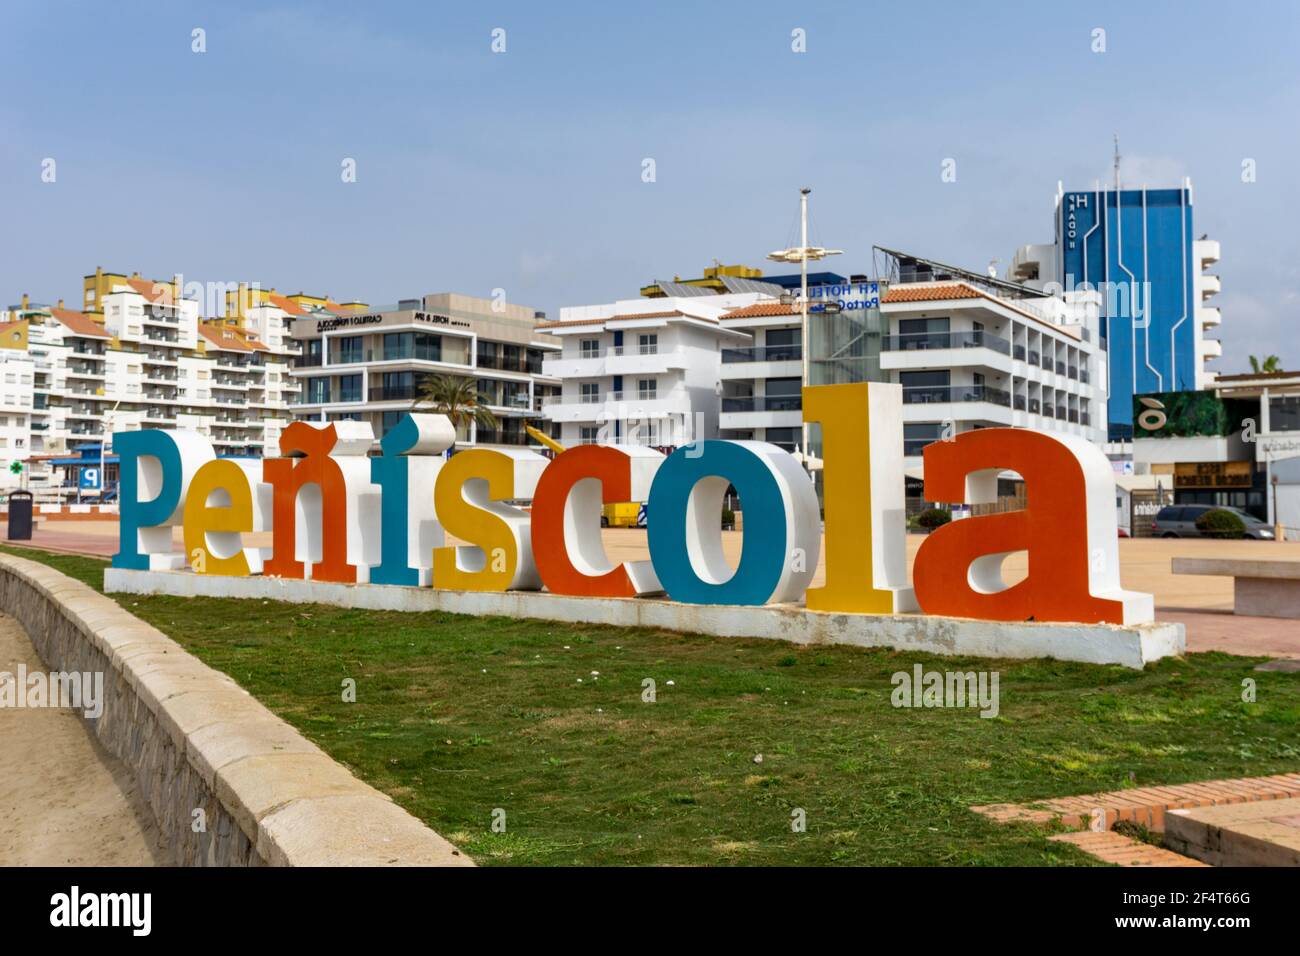 A view of the town sign and beach of Peniscola on the Costa del Azahar in Spain Stock Photo